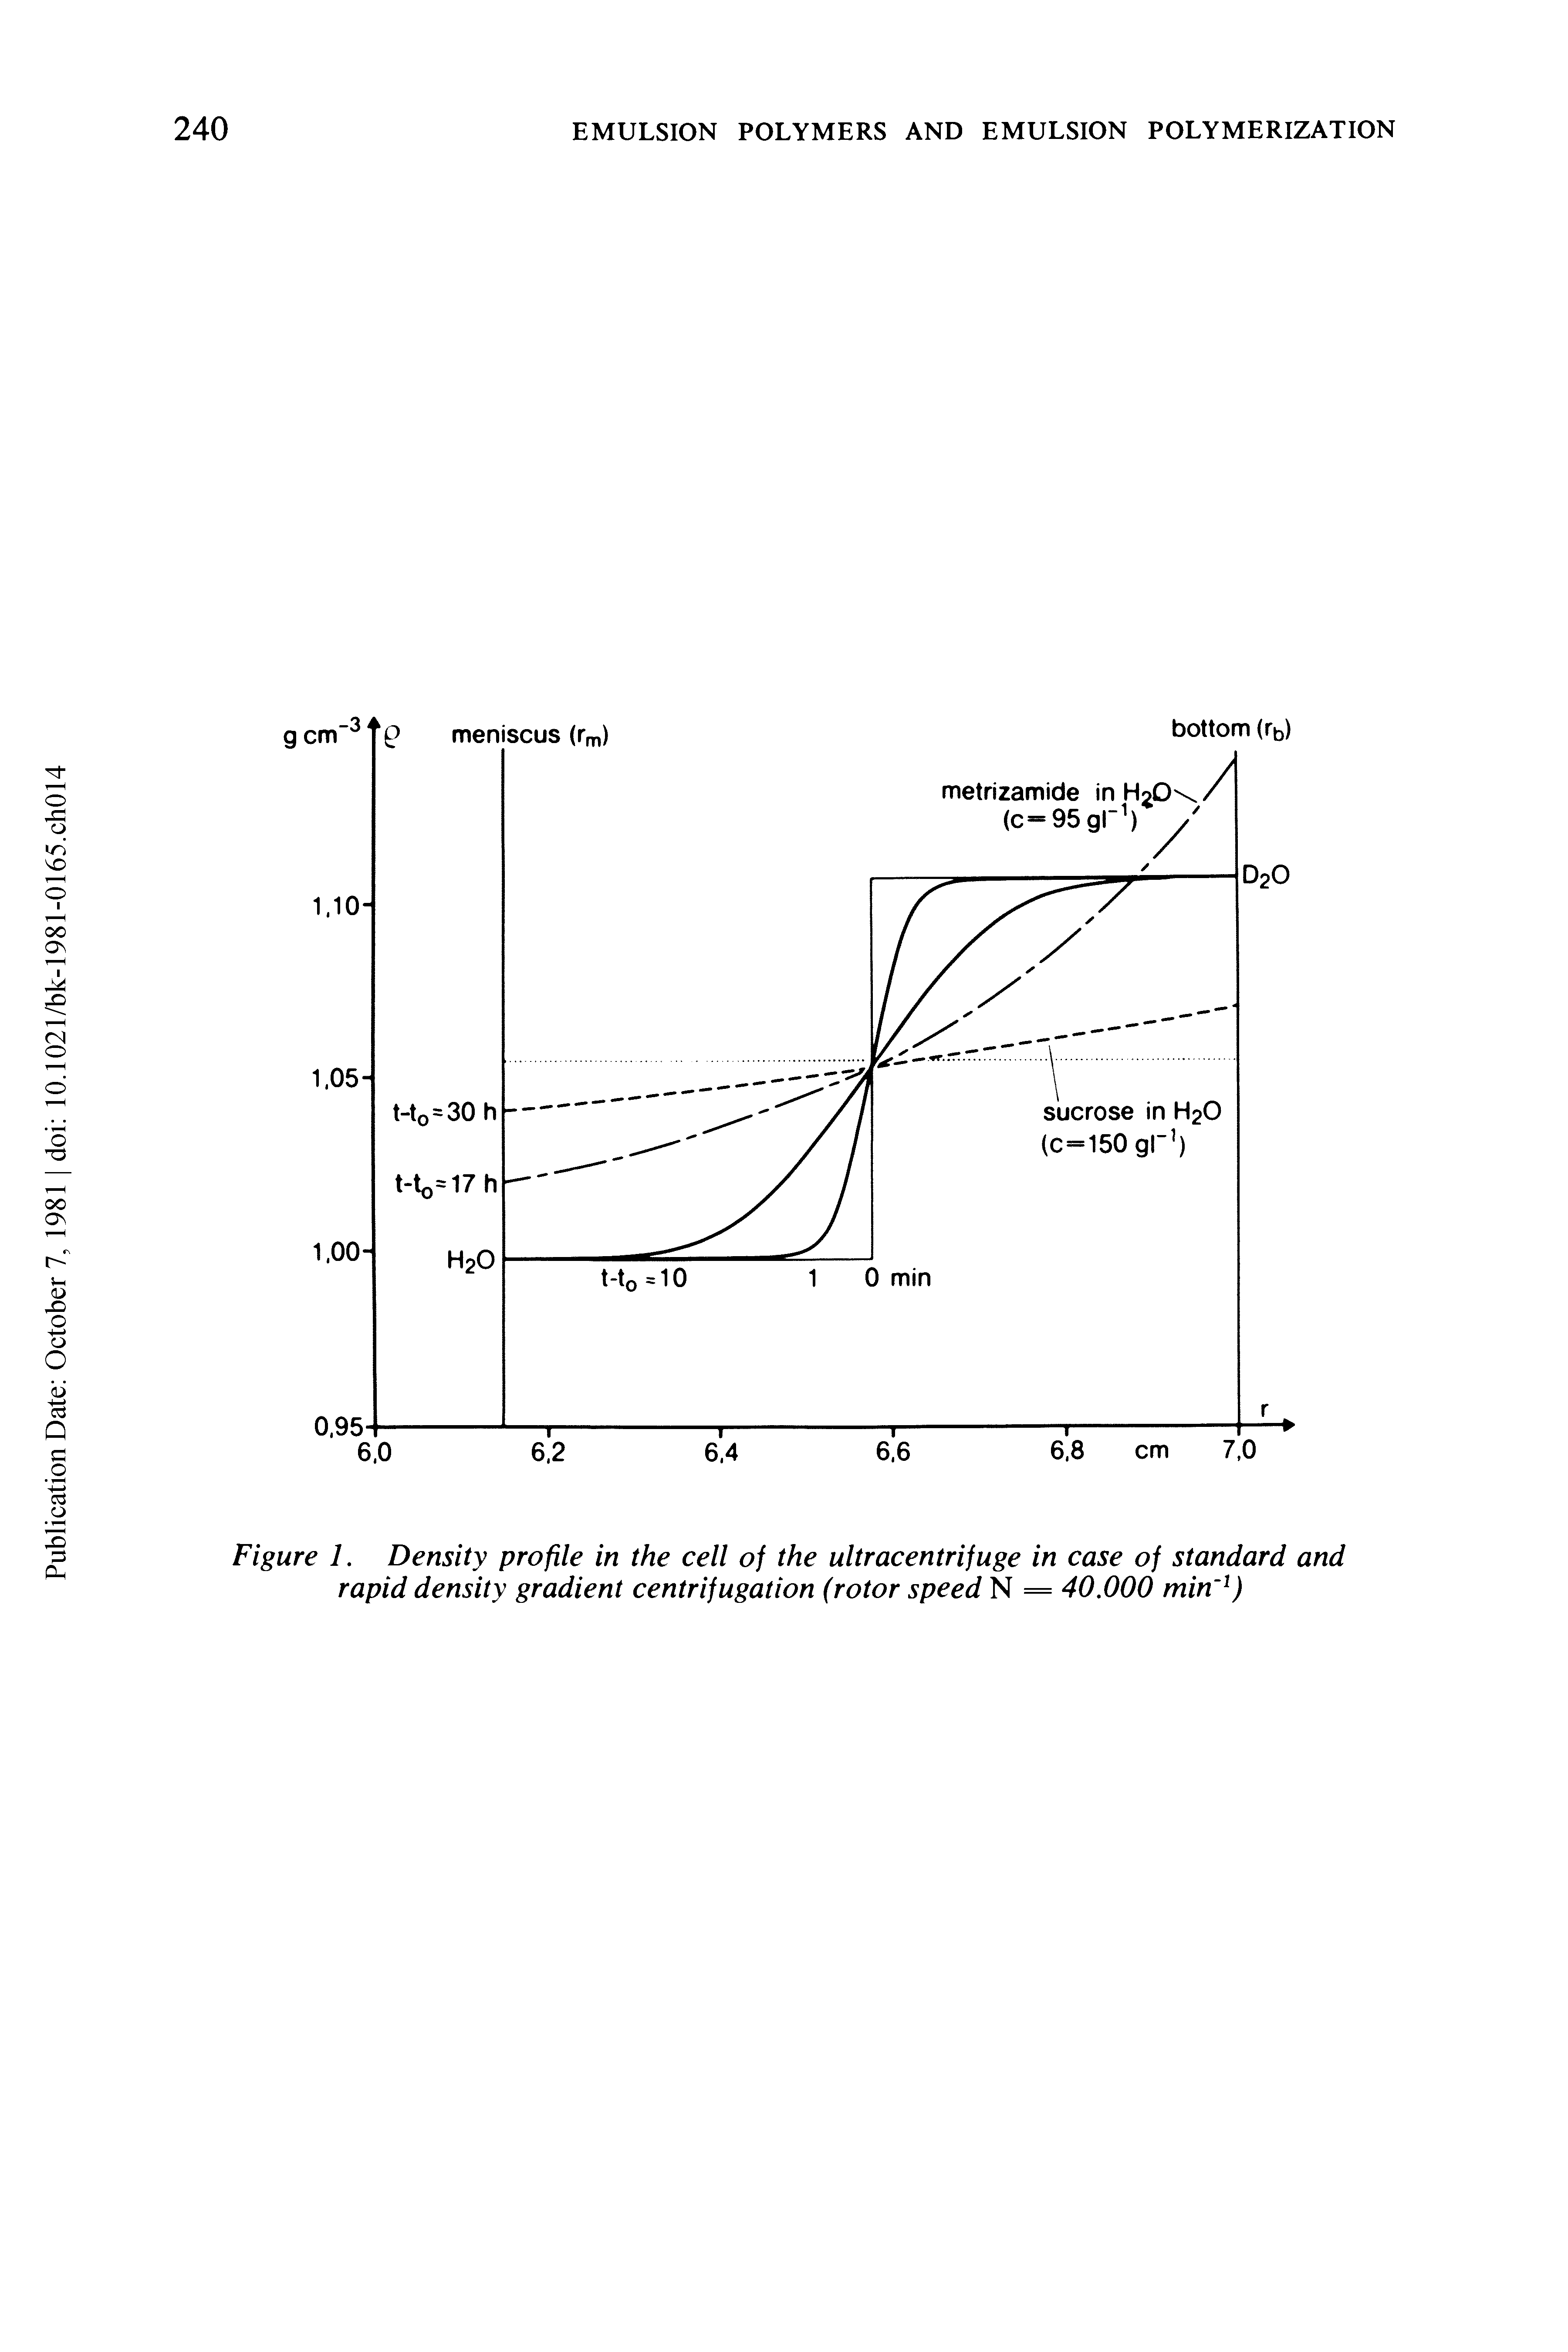 Figure 1. Density profile in the cell of the ultracentrifuge in case of standard and rapid density gradient centrifugation (rotor speed N = 40.000 min 1)...